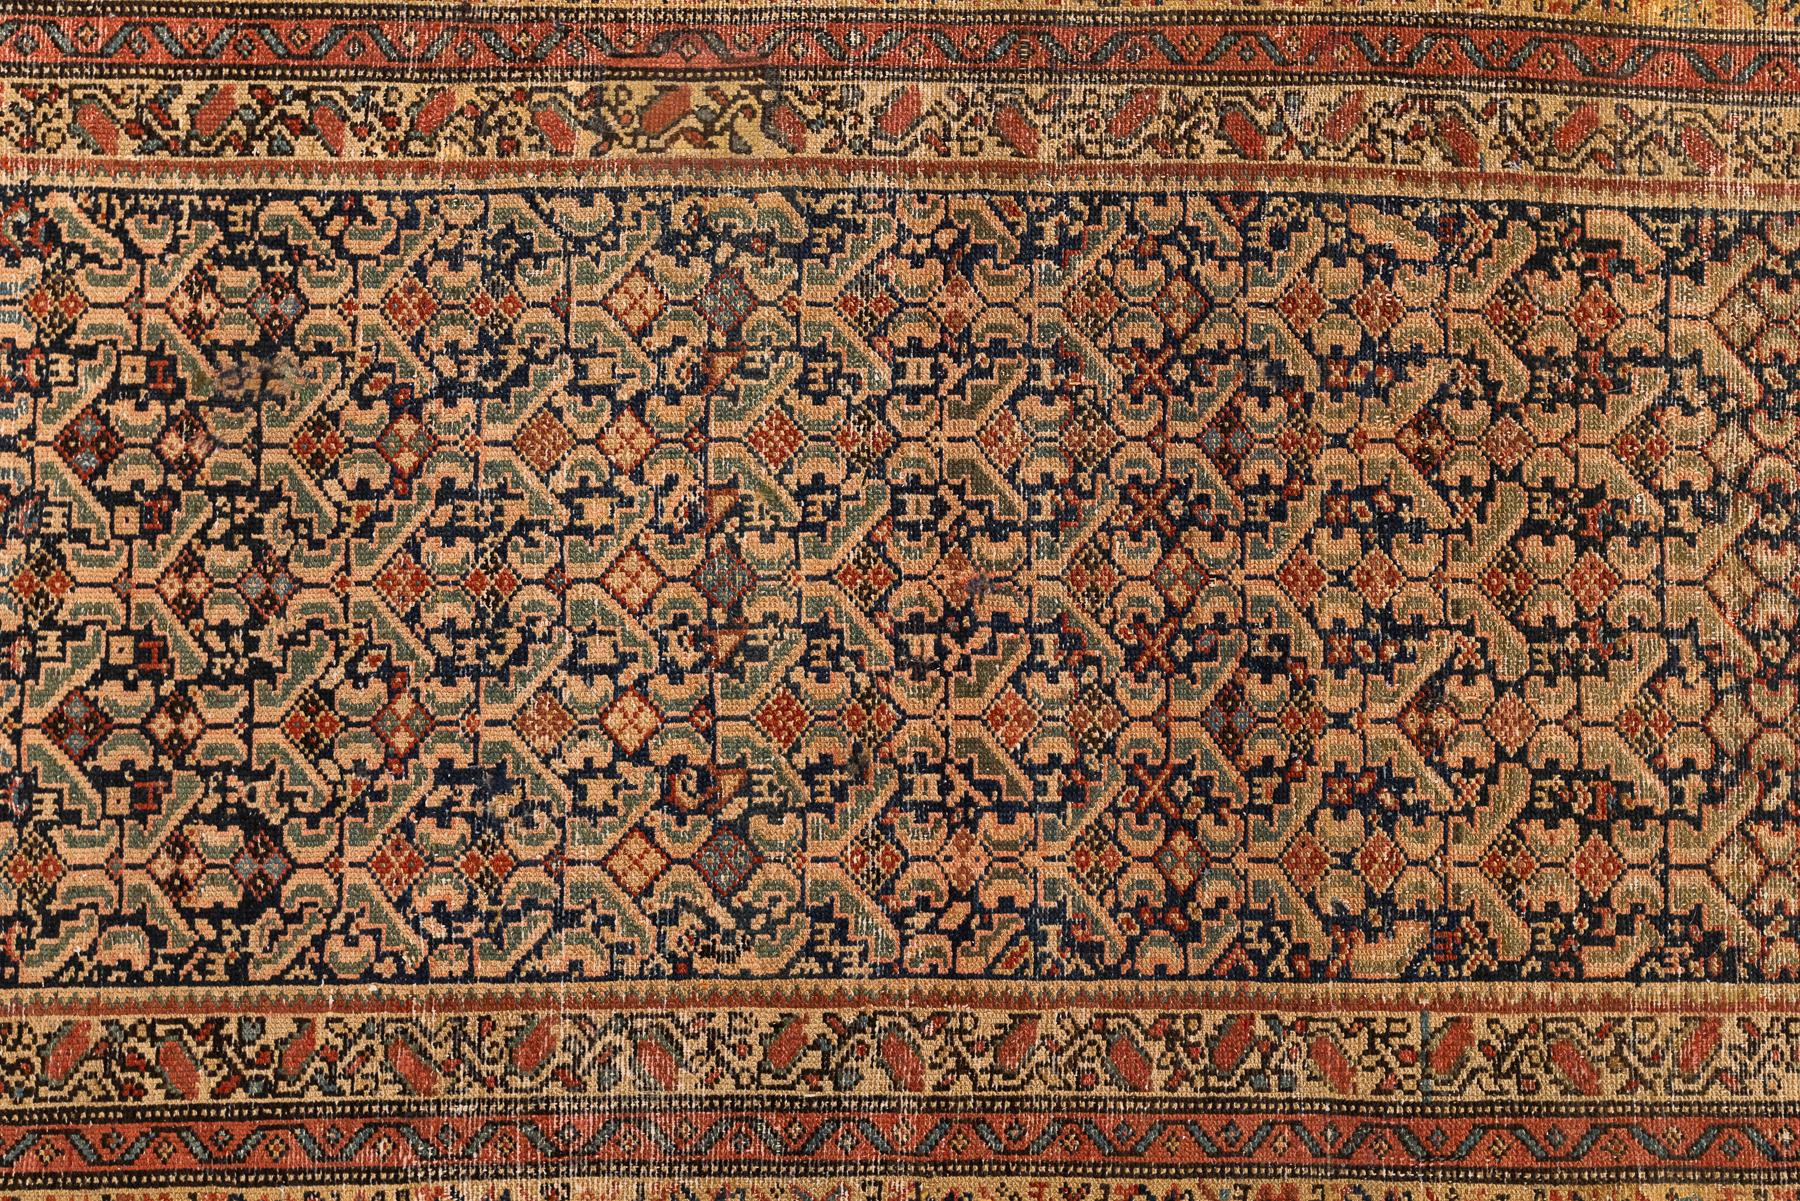 Malayer – Northwest Persia

Antique Persian Malayer rug with a stylized design covering the entire main field of the carpet in navy with a pastel colour balance in beige, green and red tones. Stylized flowers accompany the whole golden border of the